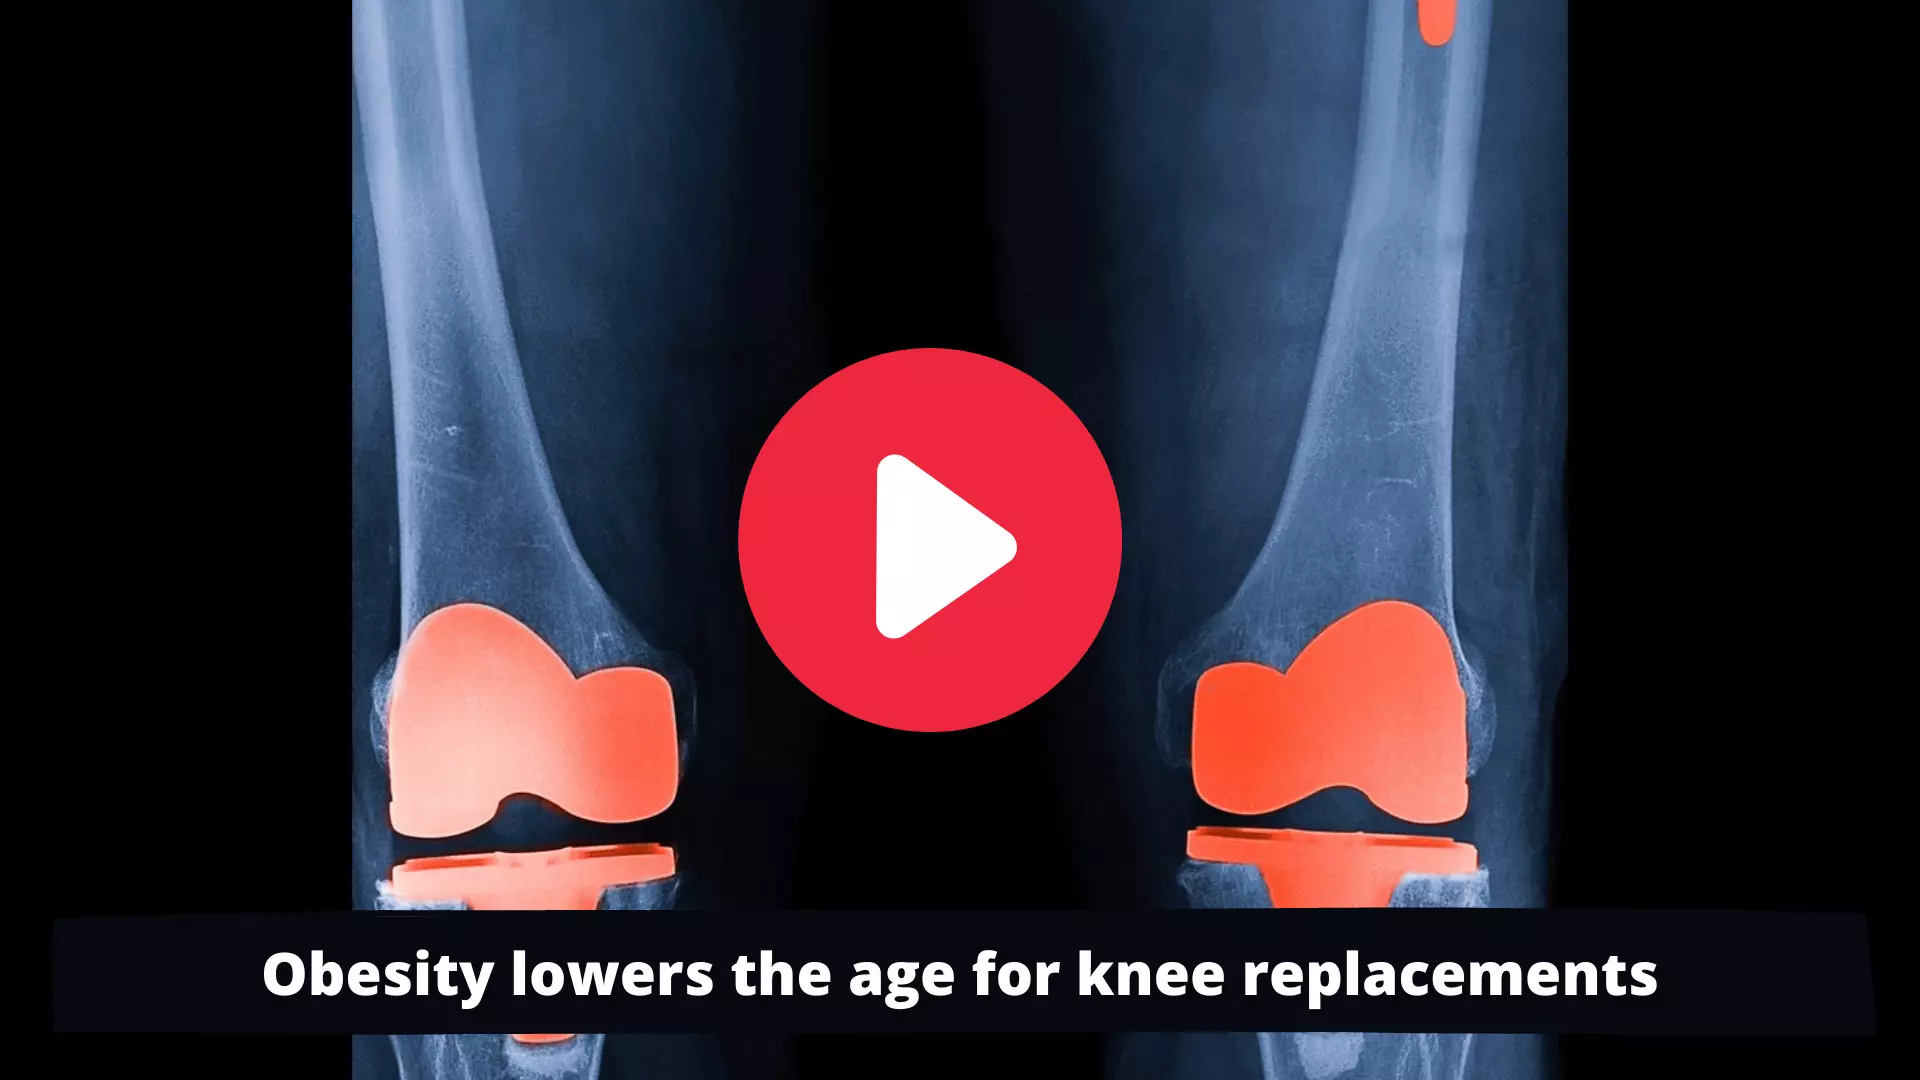 Obesity lowers the age for knee replacements